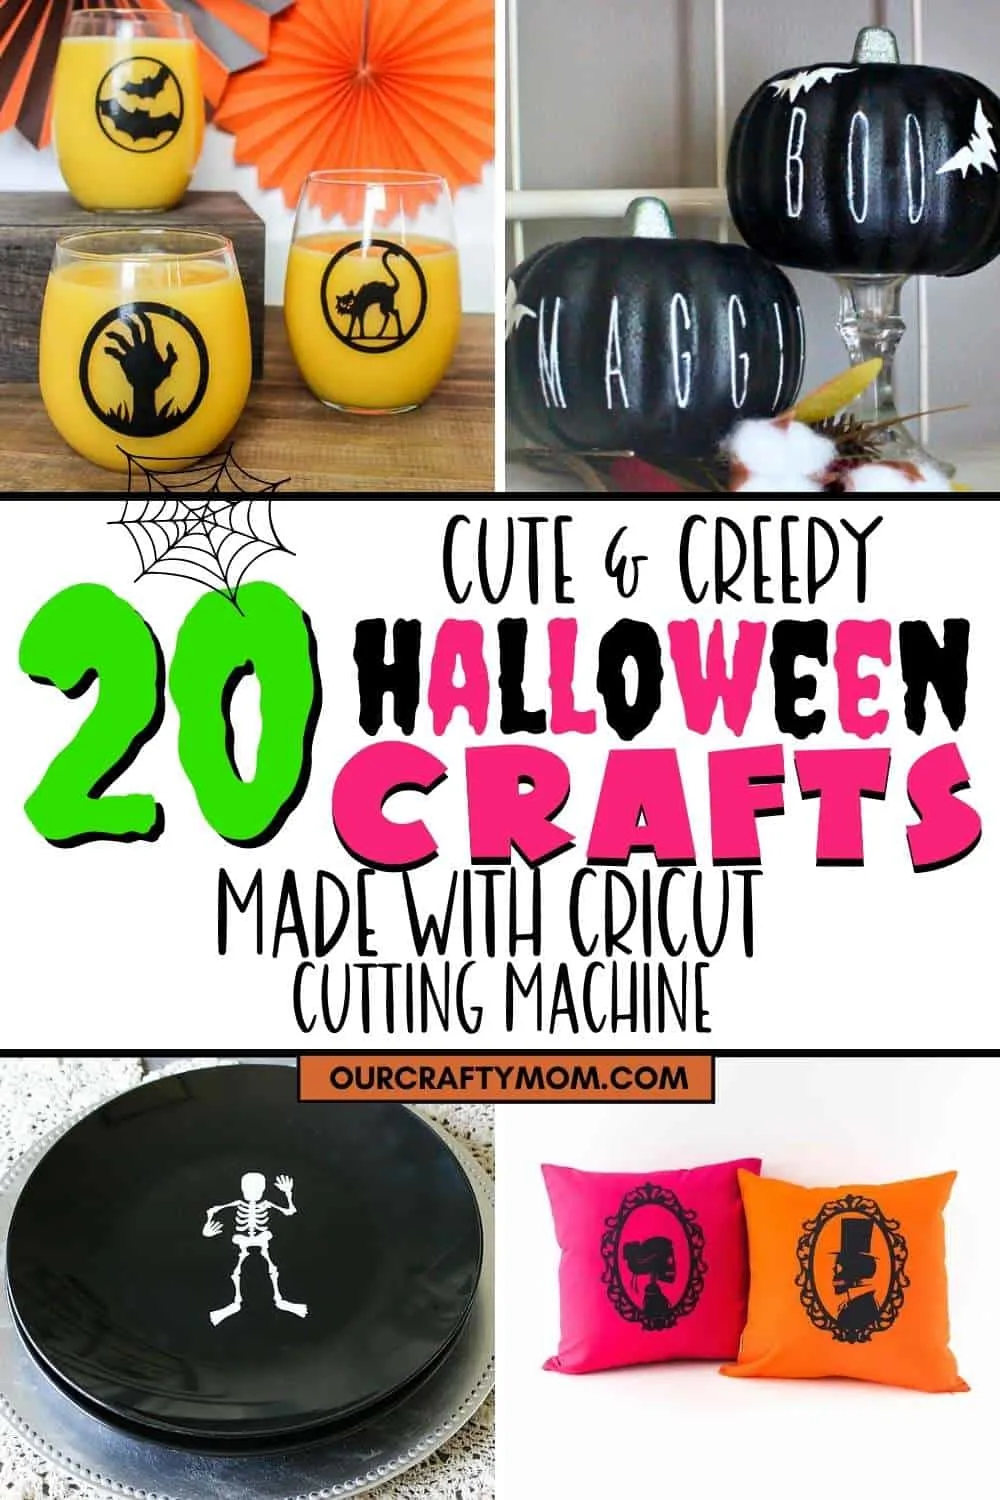 cricut halloween collage with text